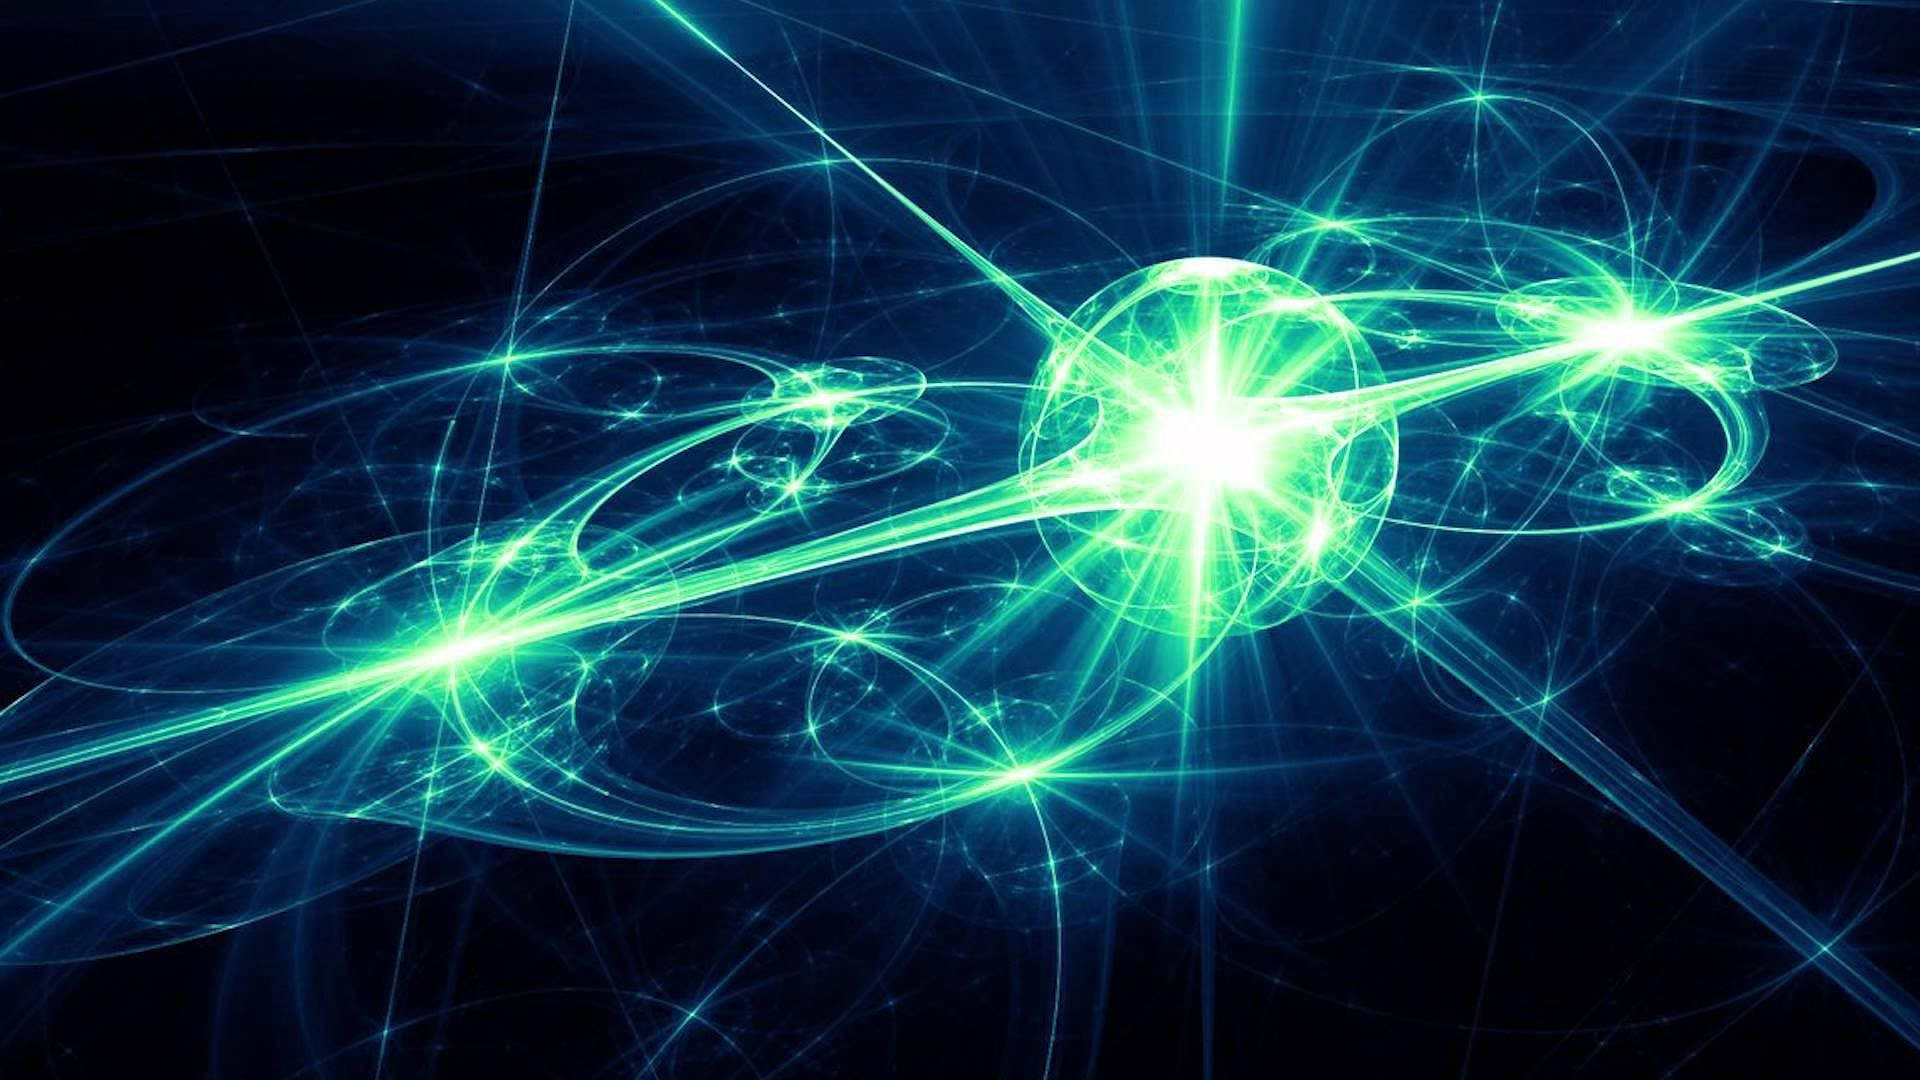 Theoretical Physics Green Particles Wallpaper